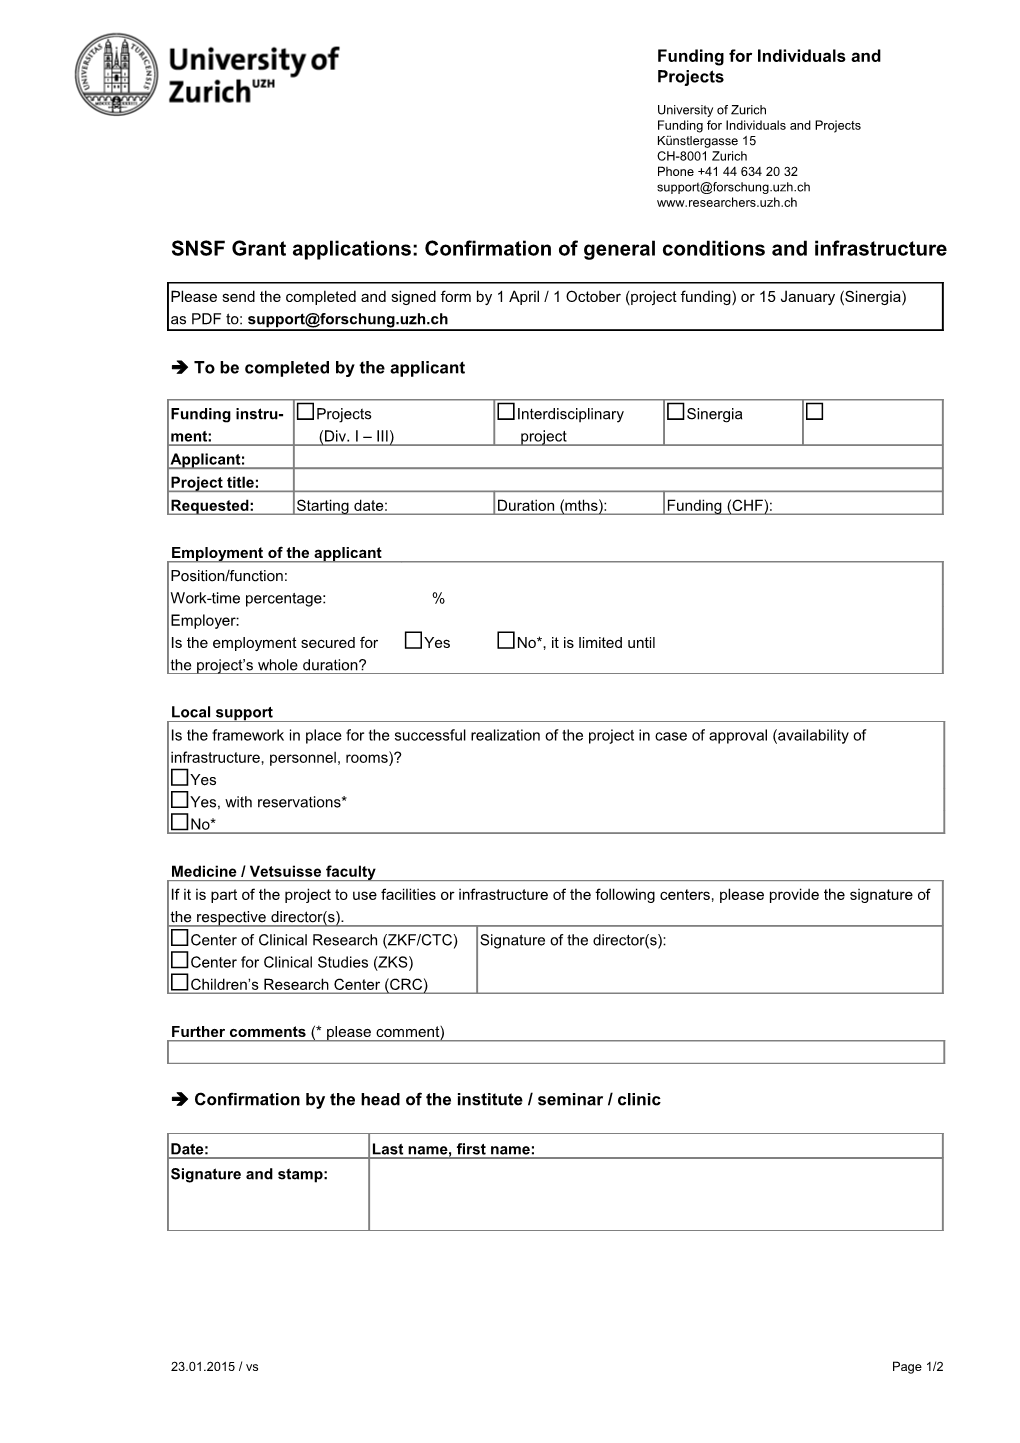 SNSF Grant Applications: Confirmation of General Conditions and Infrastructure